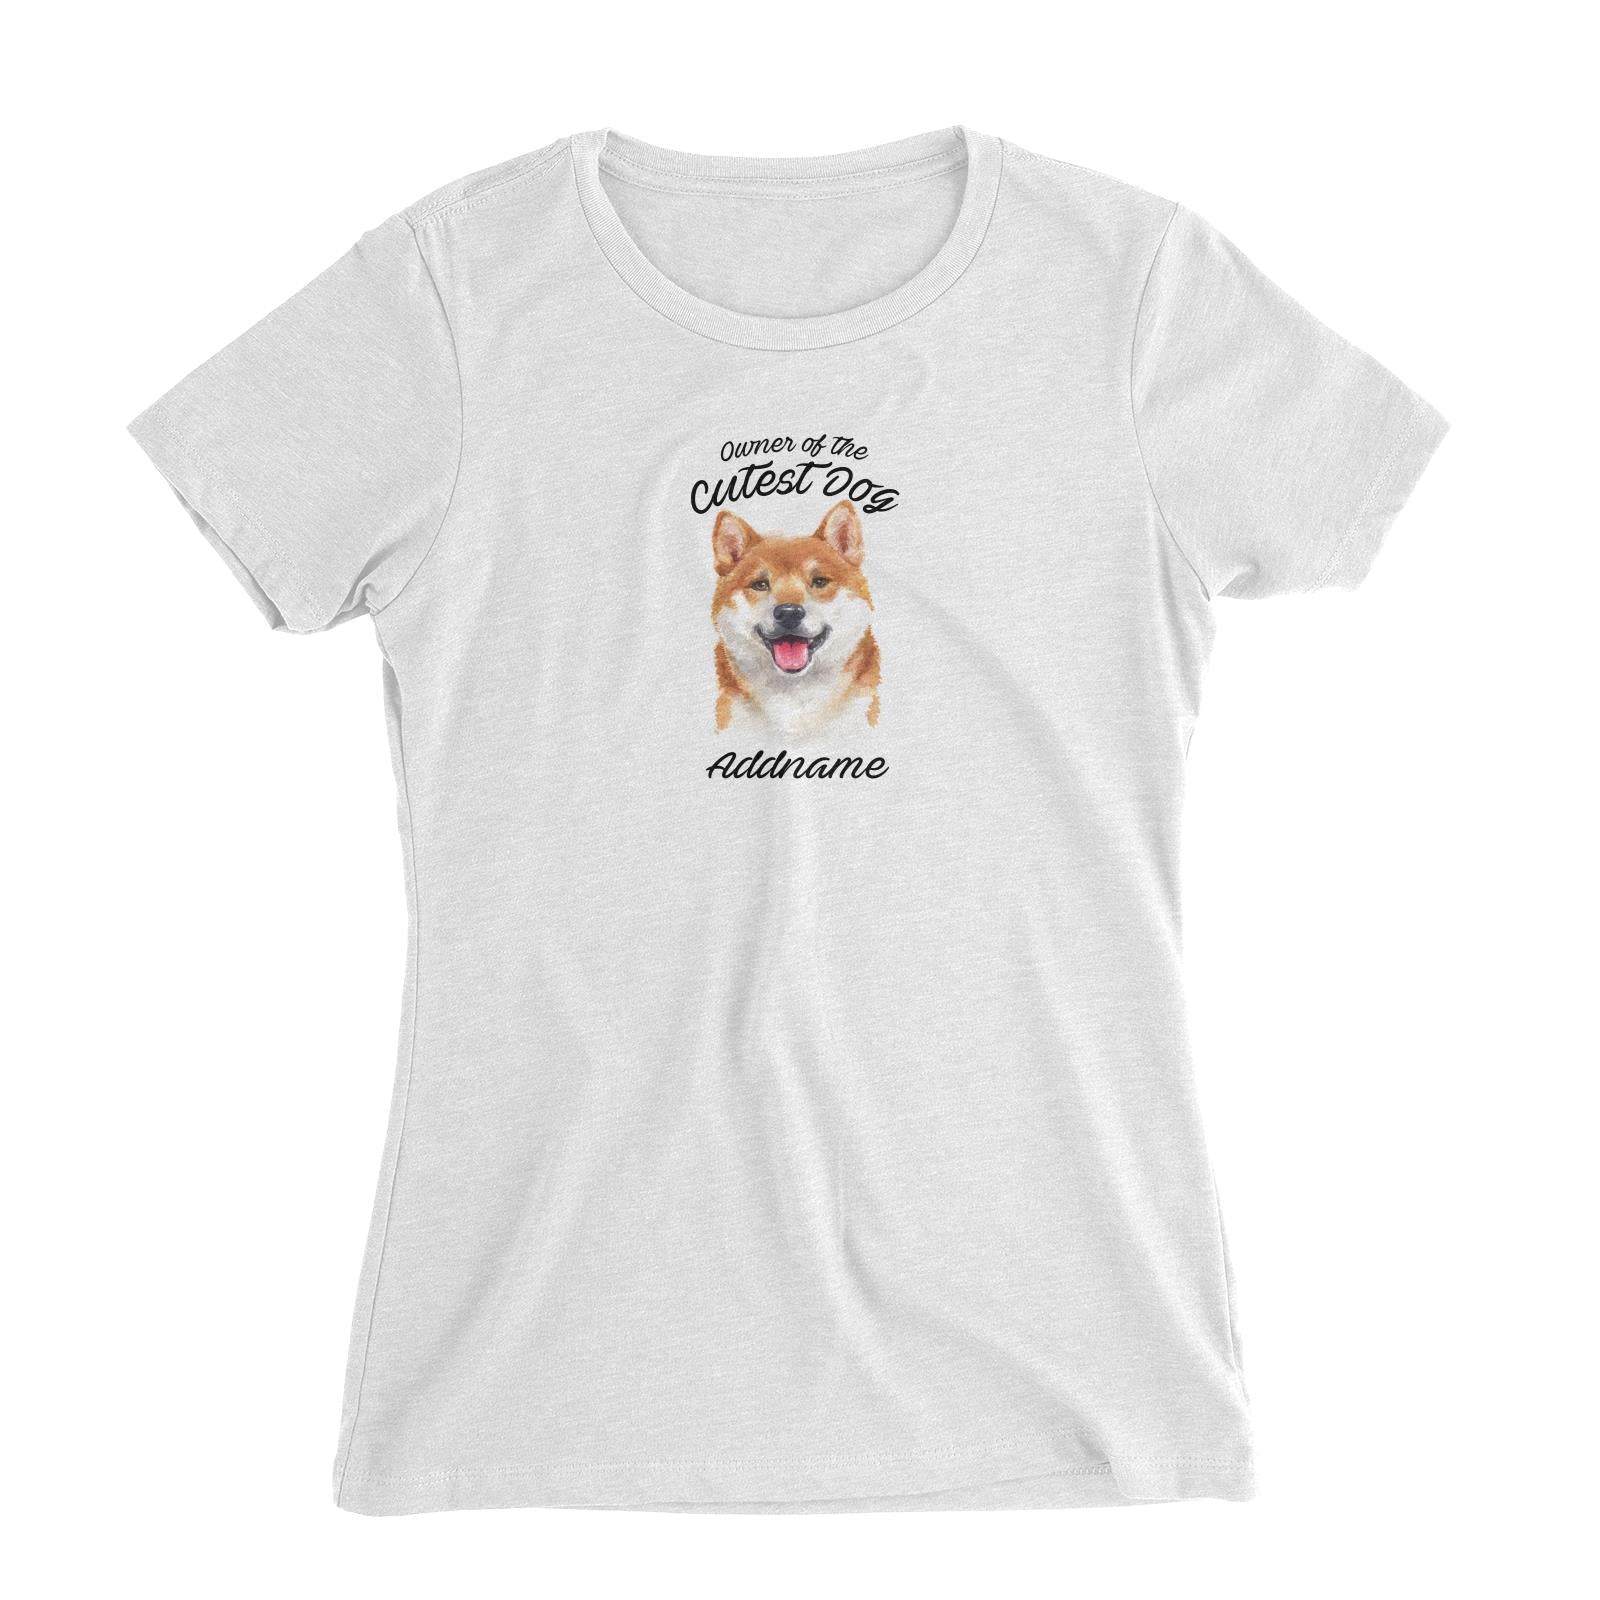 Watercolor Dog Owner Of The Cutest Dog Shiba Inu Addname Women's Slim Fit T-Shirt